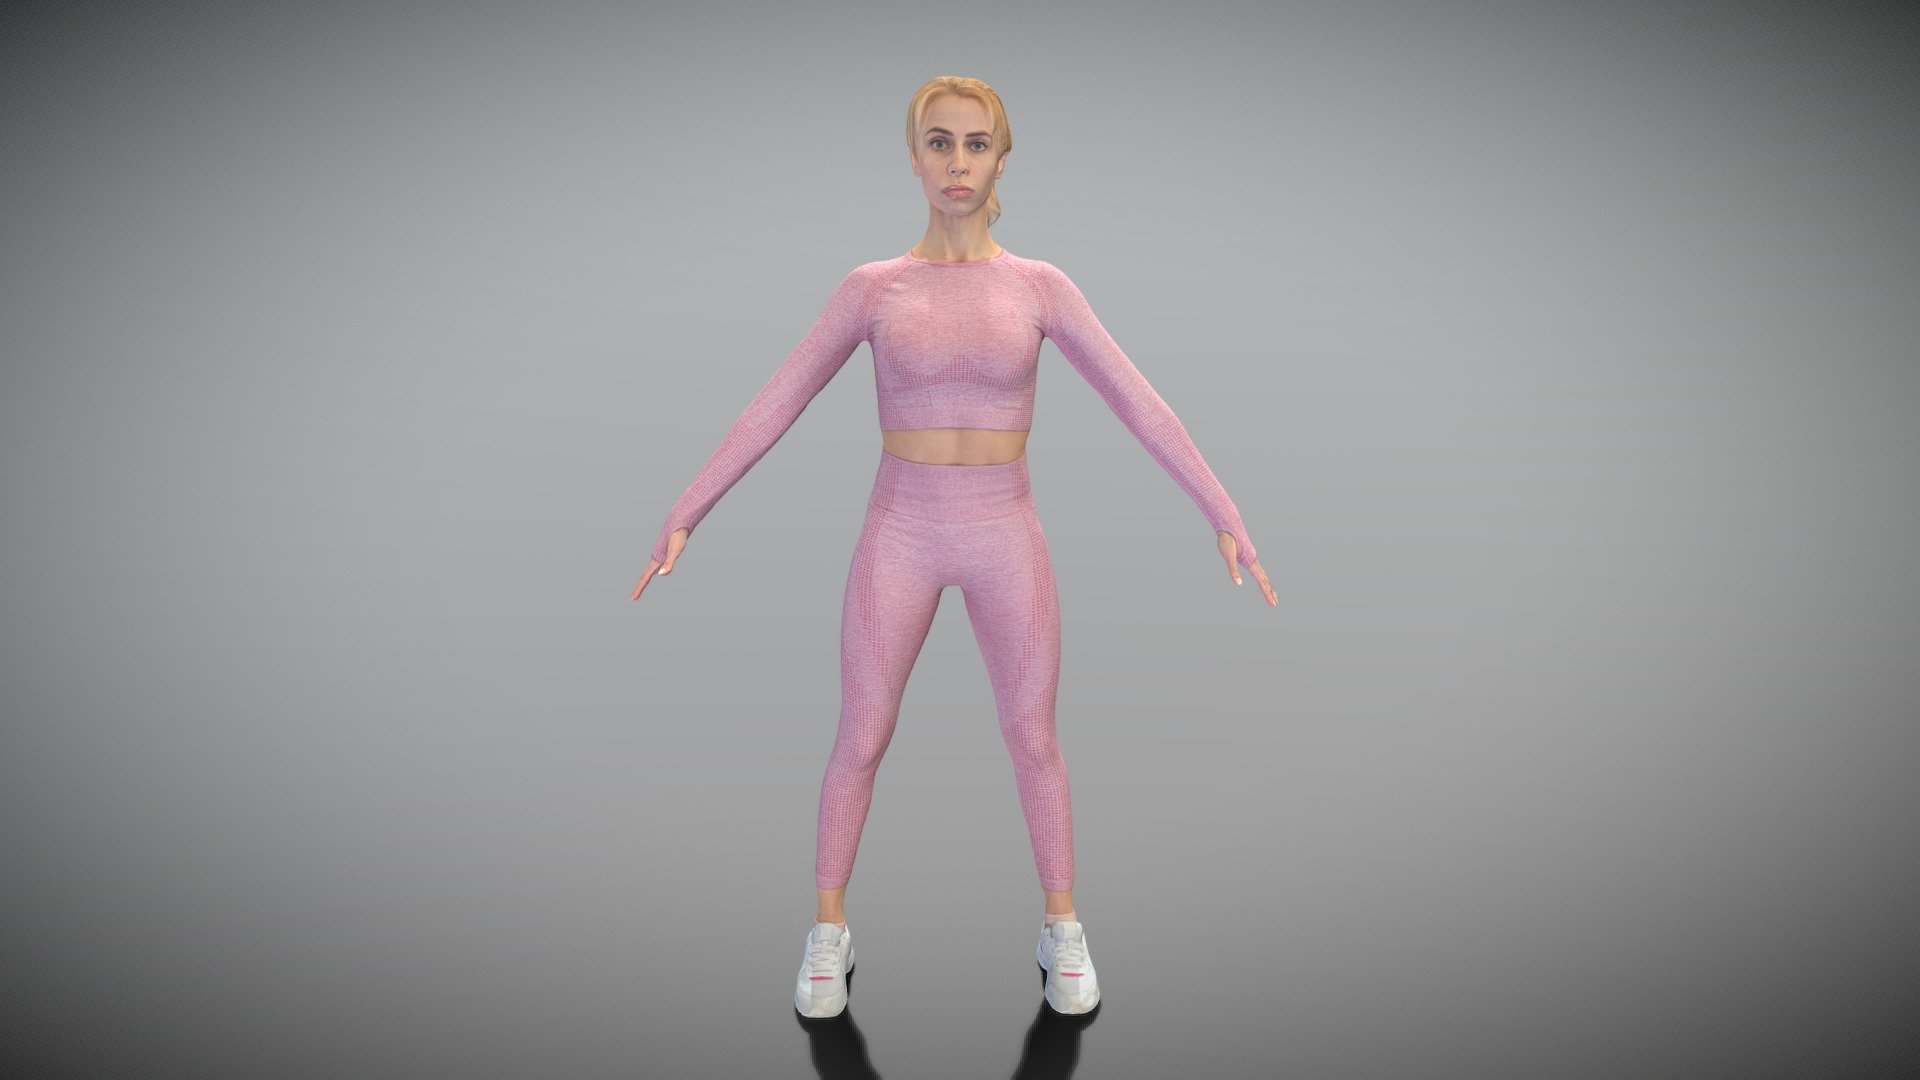 This is a true human size detailed model of a beautiful young woman of Caucasian appearance dressed in sportswear. The model is captured in the A-pose with mesh ready for rigging and animation in all most usable 3d software.

Technical specifications:




digital double scan model

low-poly model

high-poly model (.ztl tool with 5-6 subdivisions) clean and retopologized automatically via ZRemesher

fully quad topology

sufficiently clean

edge Loops based

ready for subdivision

8K texture color map

non-overlapping UV map

ready for animation

PBR textures 8K resolution: Normal, Displacement, Albedo maps

Download package includes a Cinema 4D project file with Redshift shader, OBJ, FBX, STL files, which are applicable for 3ds Max, Maya, Unreal Engine, Unity, Blender, etc. All the textures you will find in the “Tex” folder, included into the main archive.

3D EVERYTHING

Stand with Ukraine! - Pretty woman in pink tracksuit in A-pose 416 - Buy Royalty Free 3D model by deep3dstudio 3d model